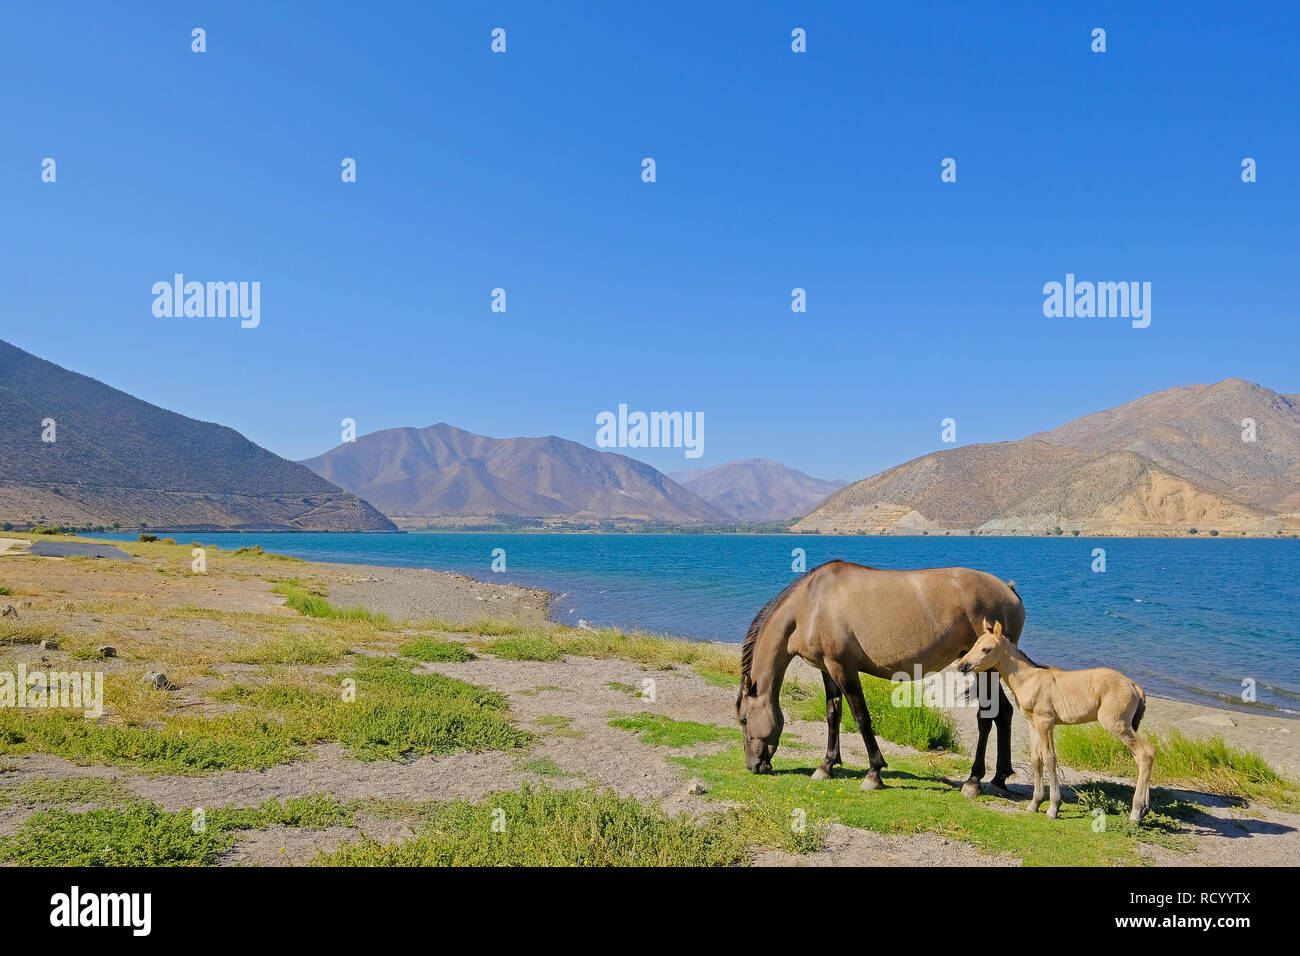 Wild horses at the dam of the Embalse Puclaro lake, Vicuna, Elqui valley, Chile, South America Stock Photo